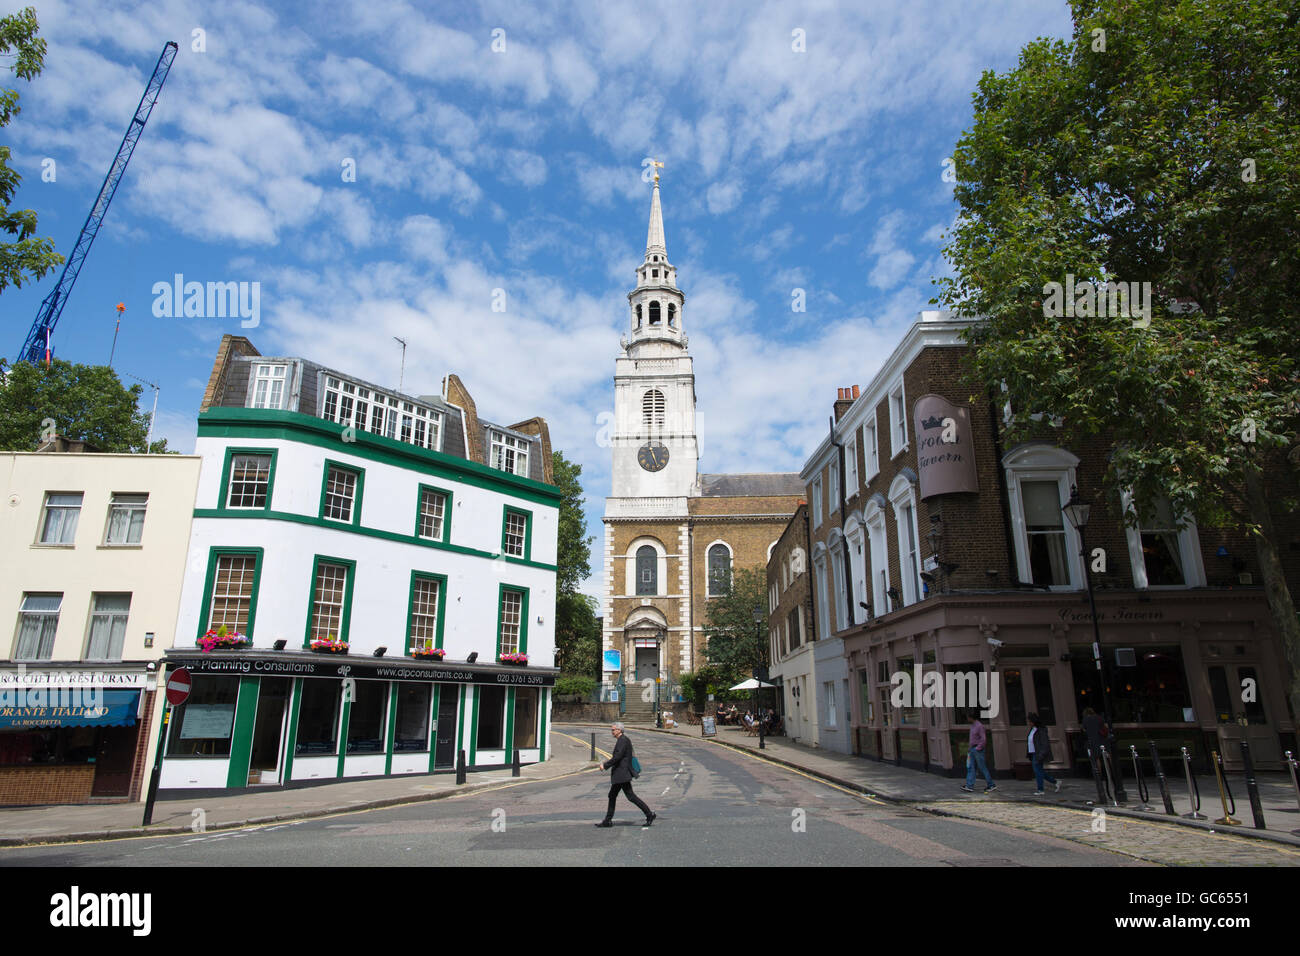 Clerkenwell Green, and the church of St James in the distance, Islington, London, UK Stock Photo